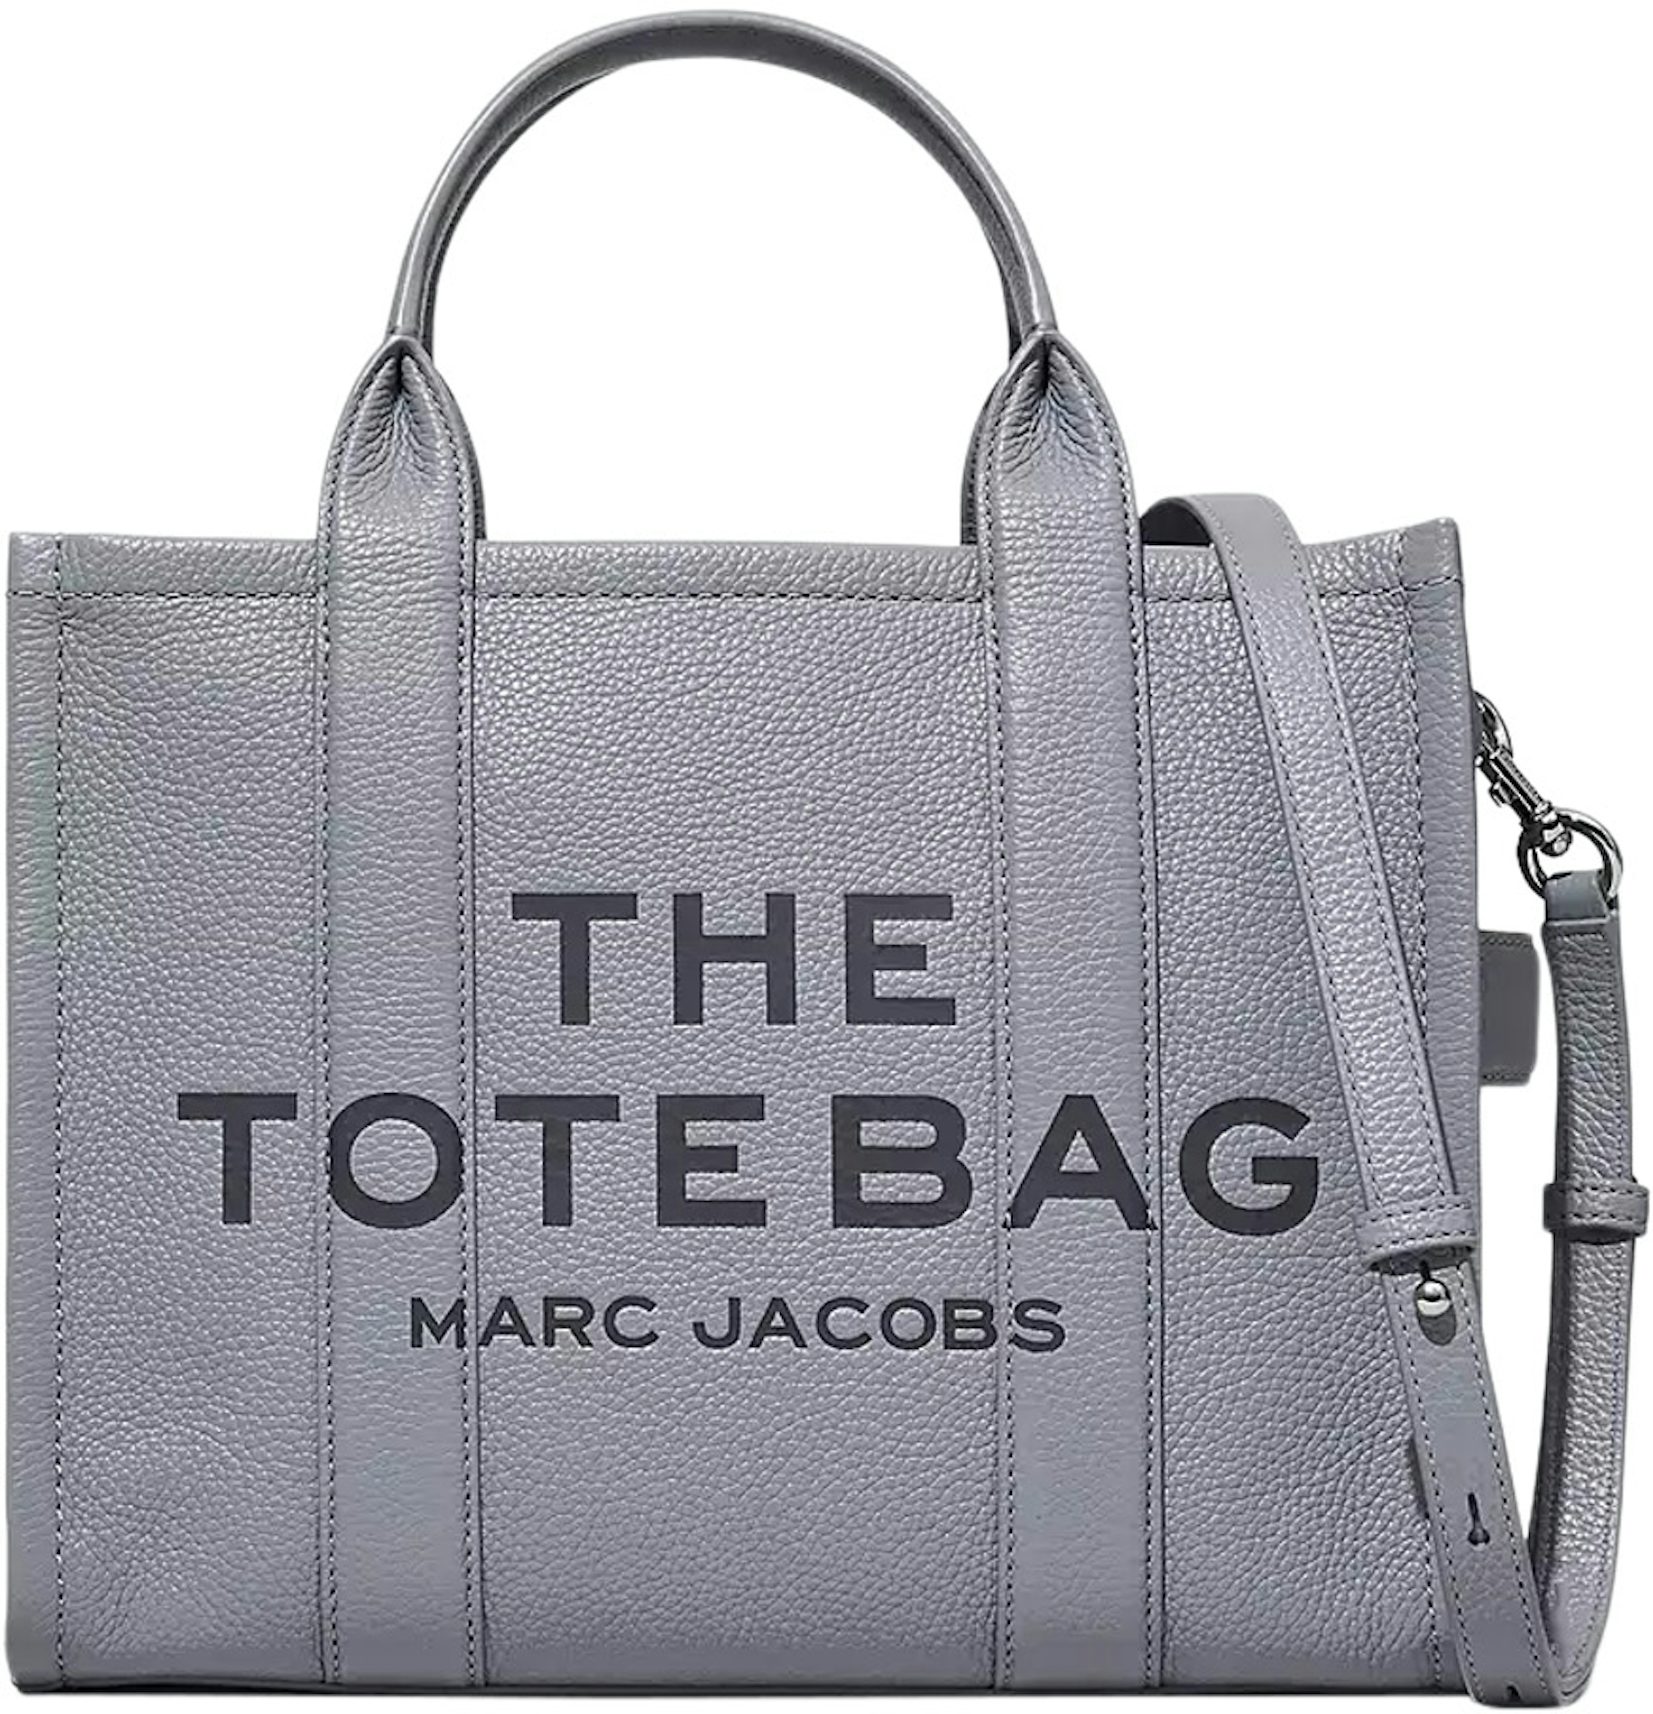 Marc Jacobs tote bags for woman